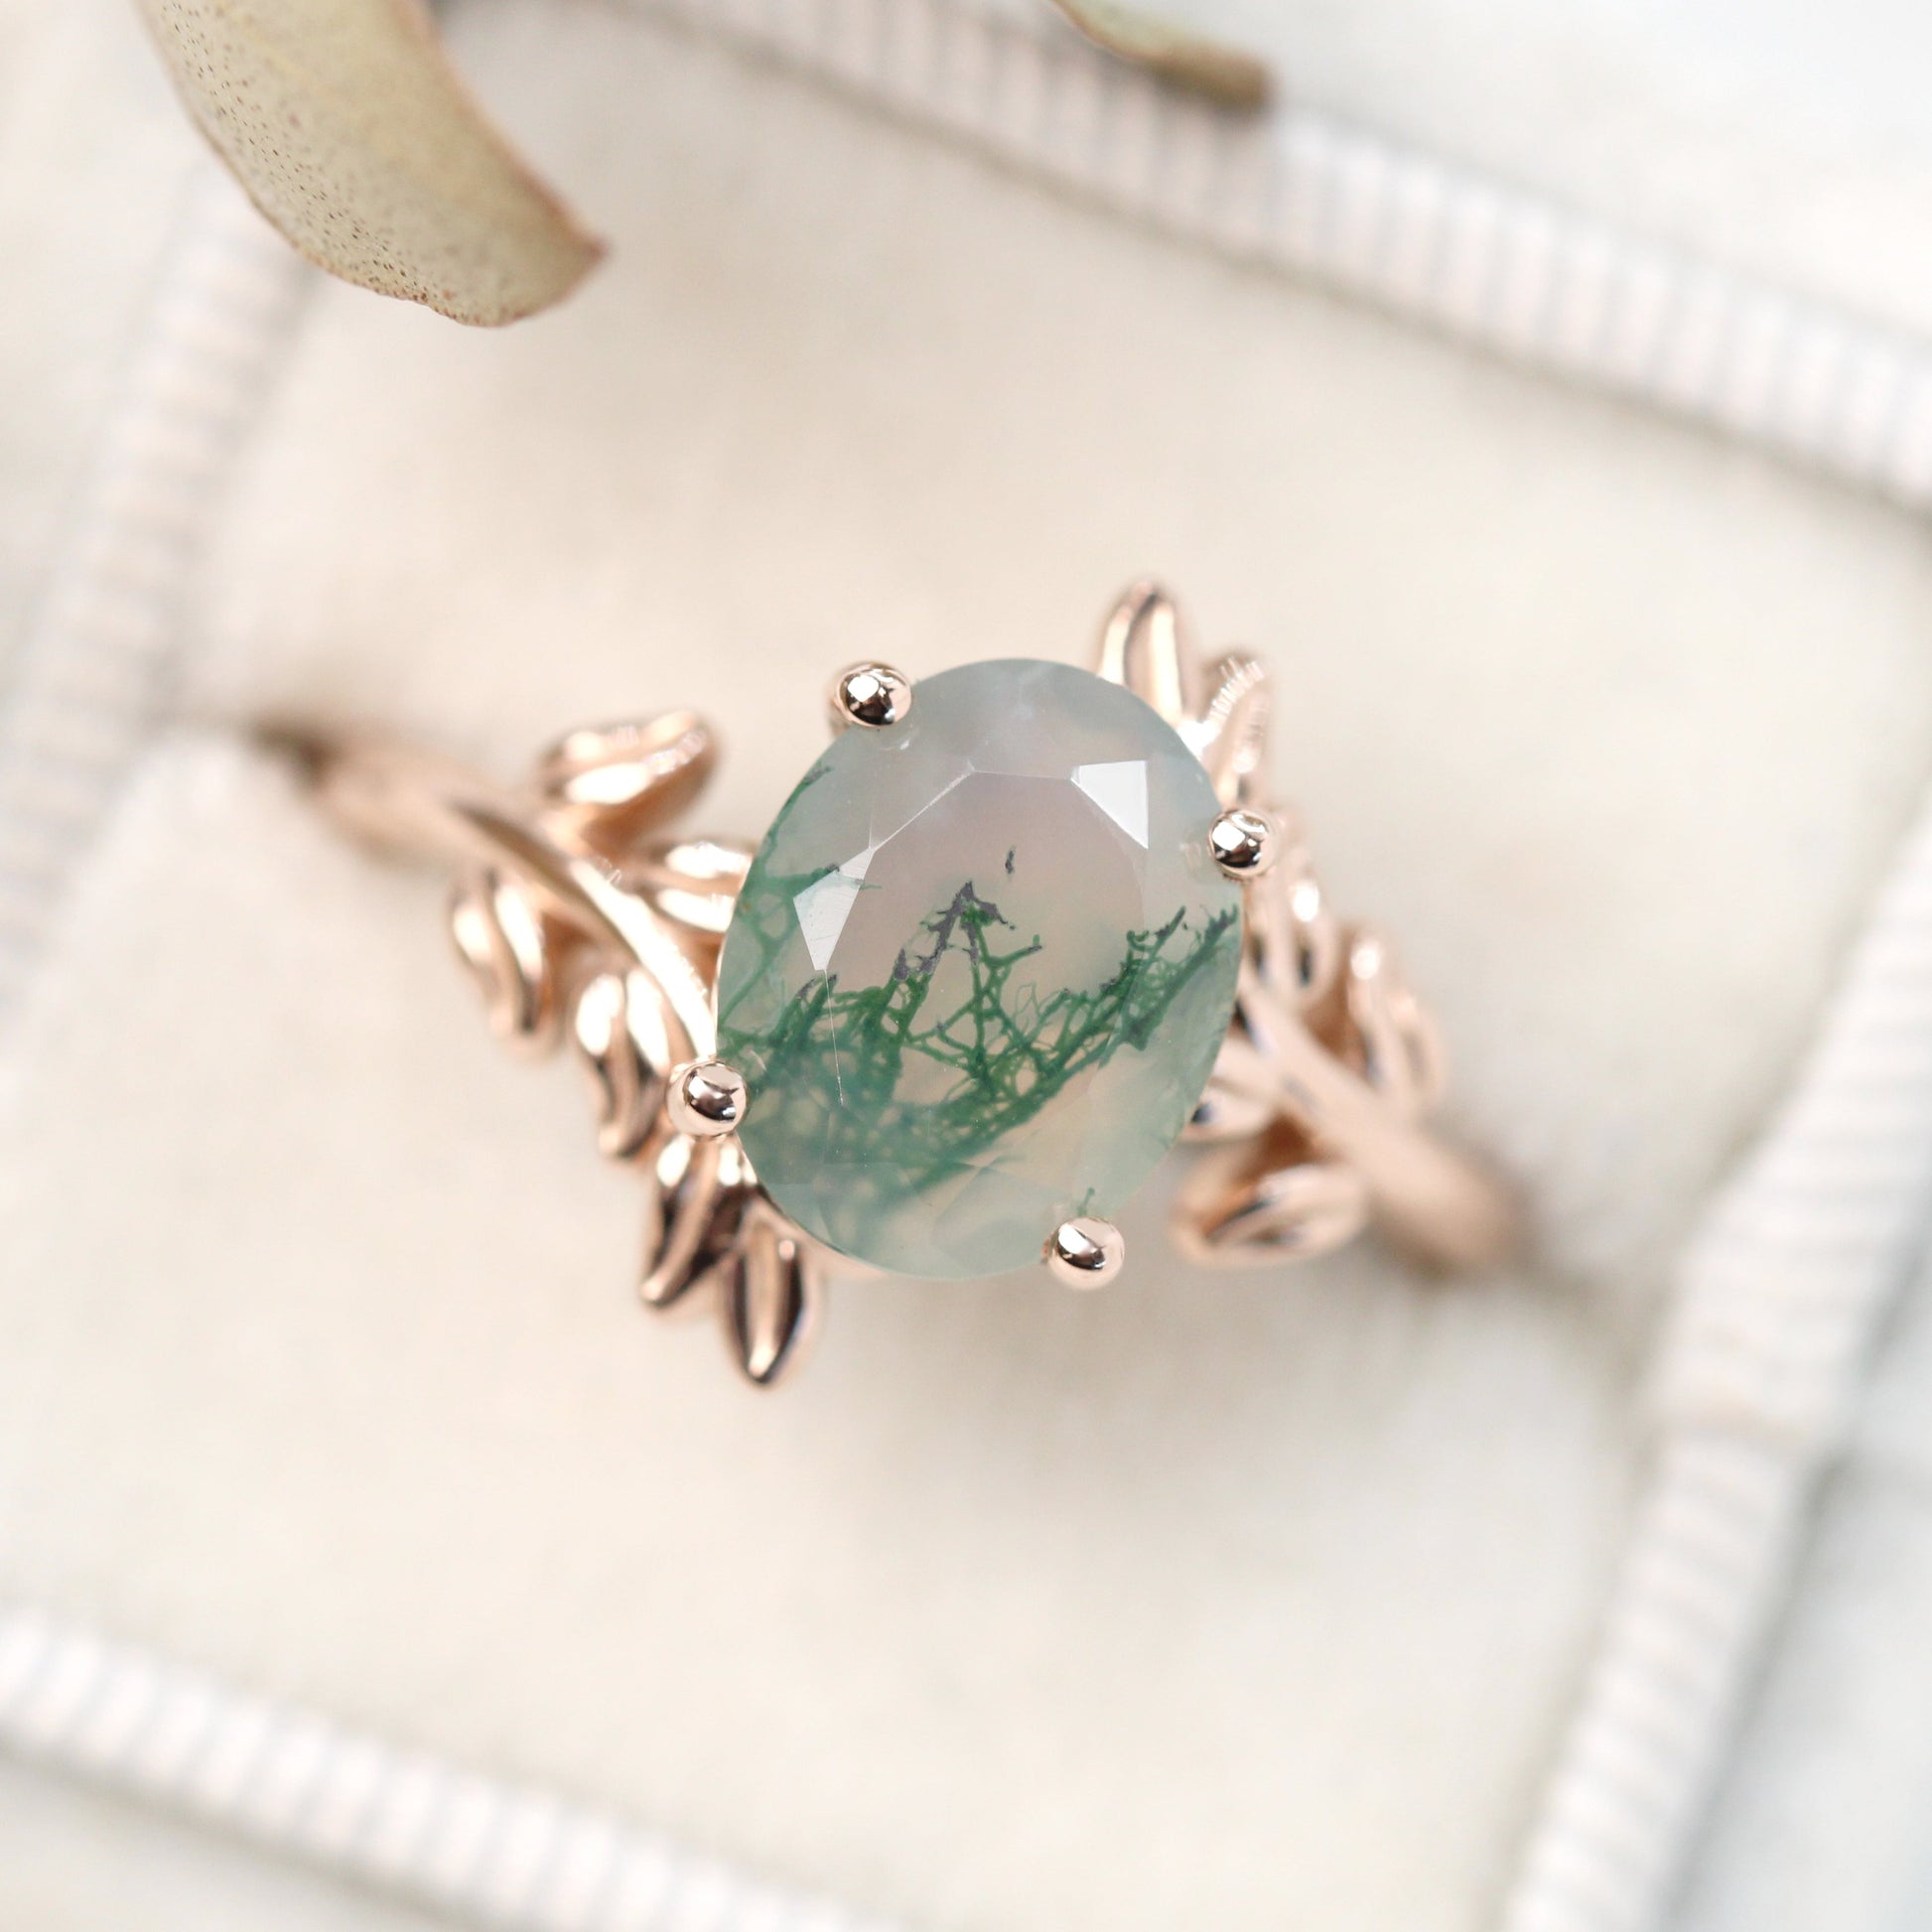 Sara Ring with a 2.50 Carat Oval Moss Agate in 14k Rose Gold - Ready to Size and Ship - Midwinter Co. Alternative Bridal Rings and Modern Fine Jewelry